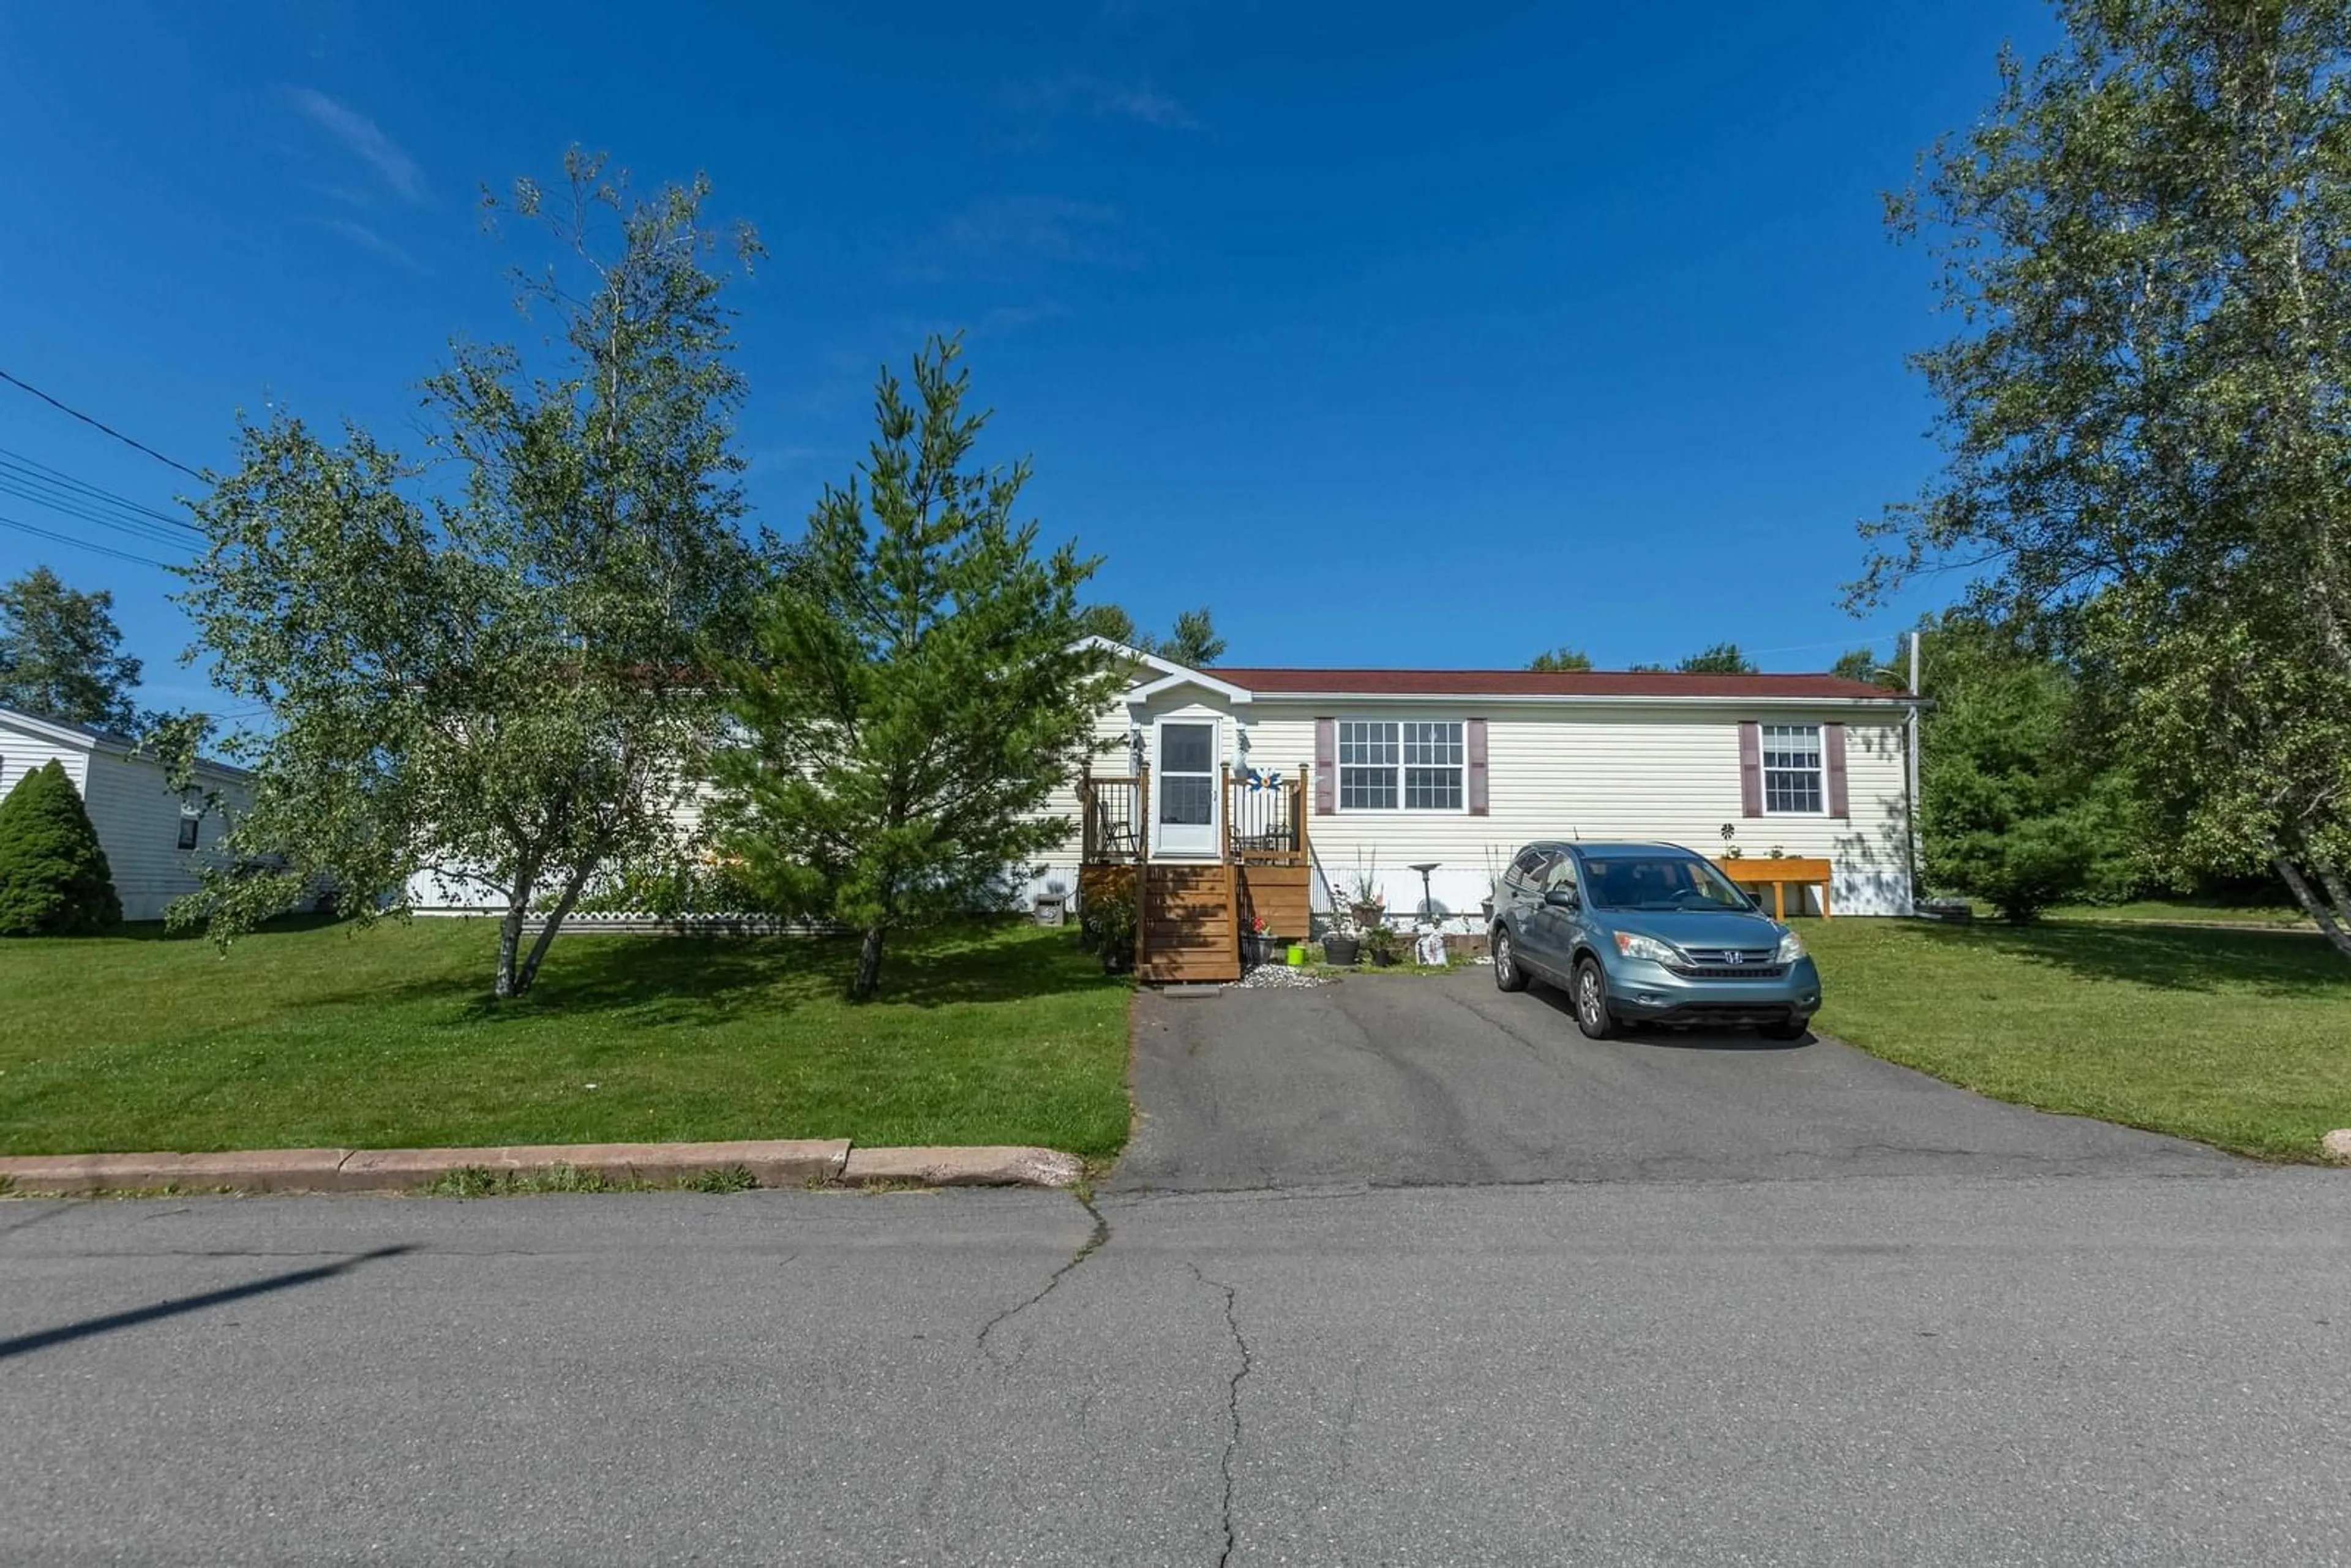 A pic from exterior of the house or condo for 24 Fernwood Dr, Amherst Nova Scotia B4H 4P4